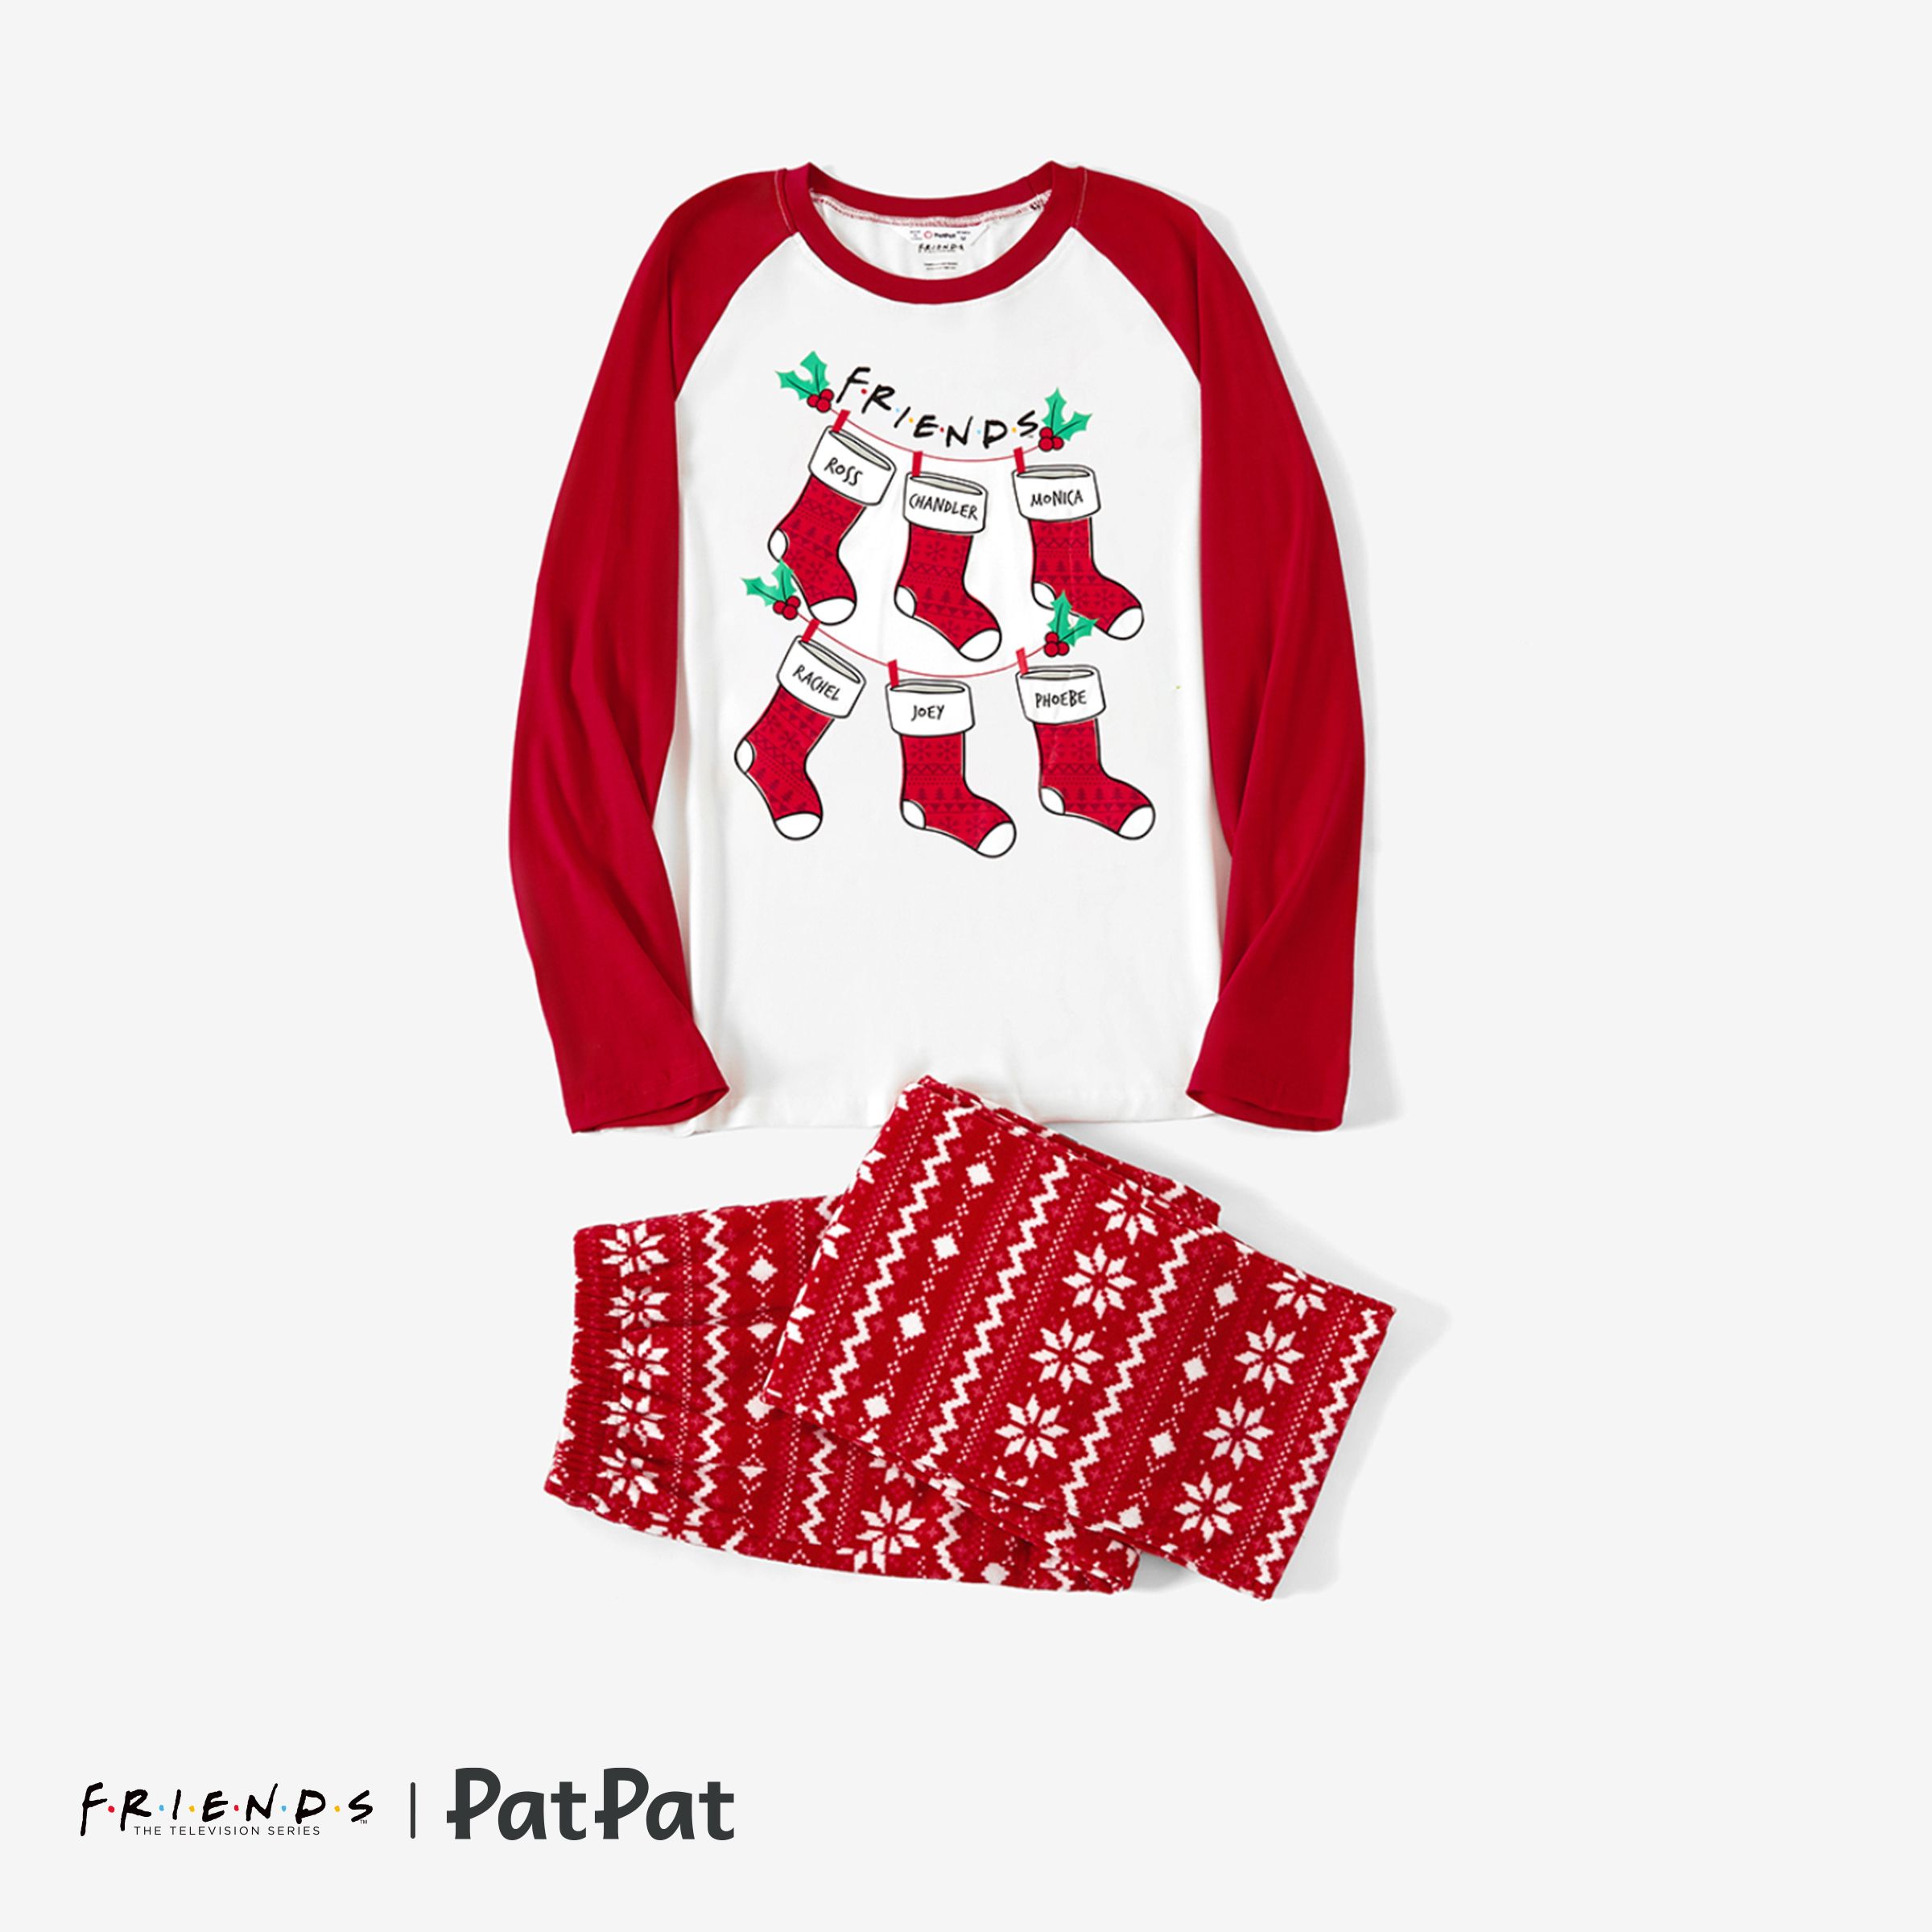 Friends Family Matching Christmas Character Print Pajamas Sets(Flame Resistant)